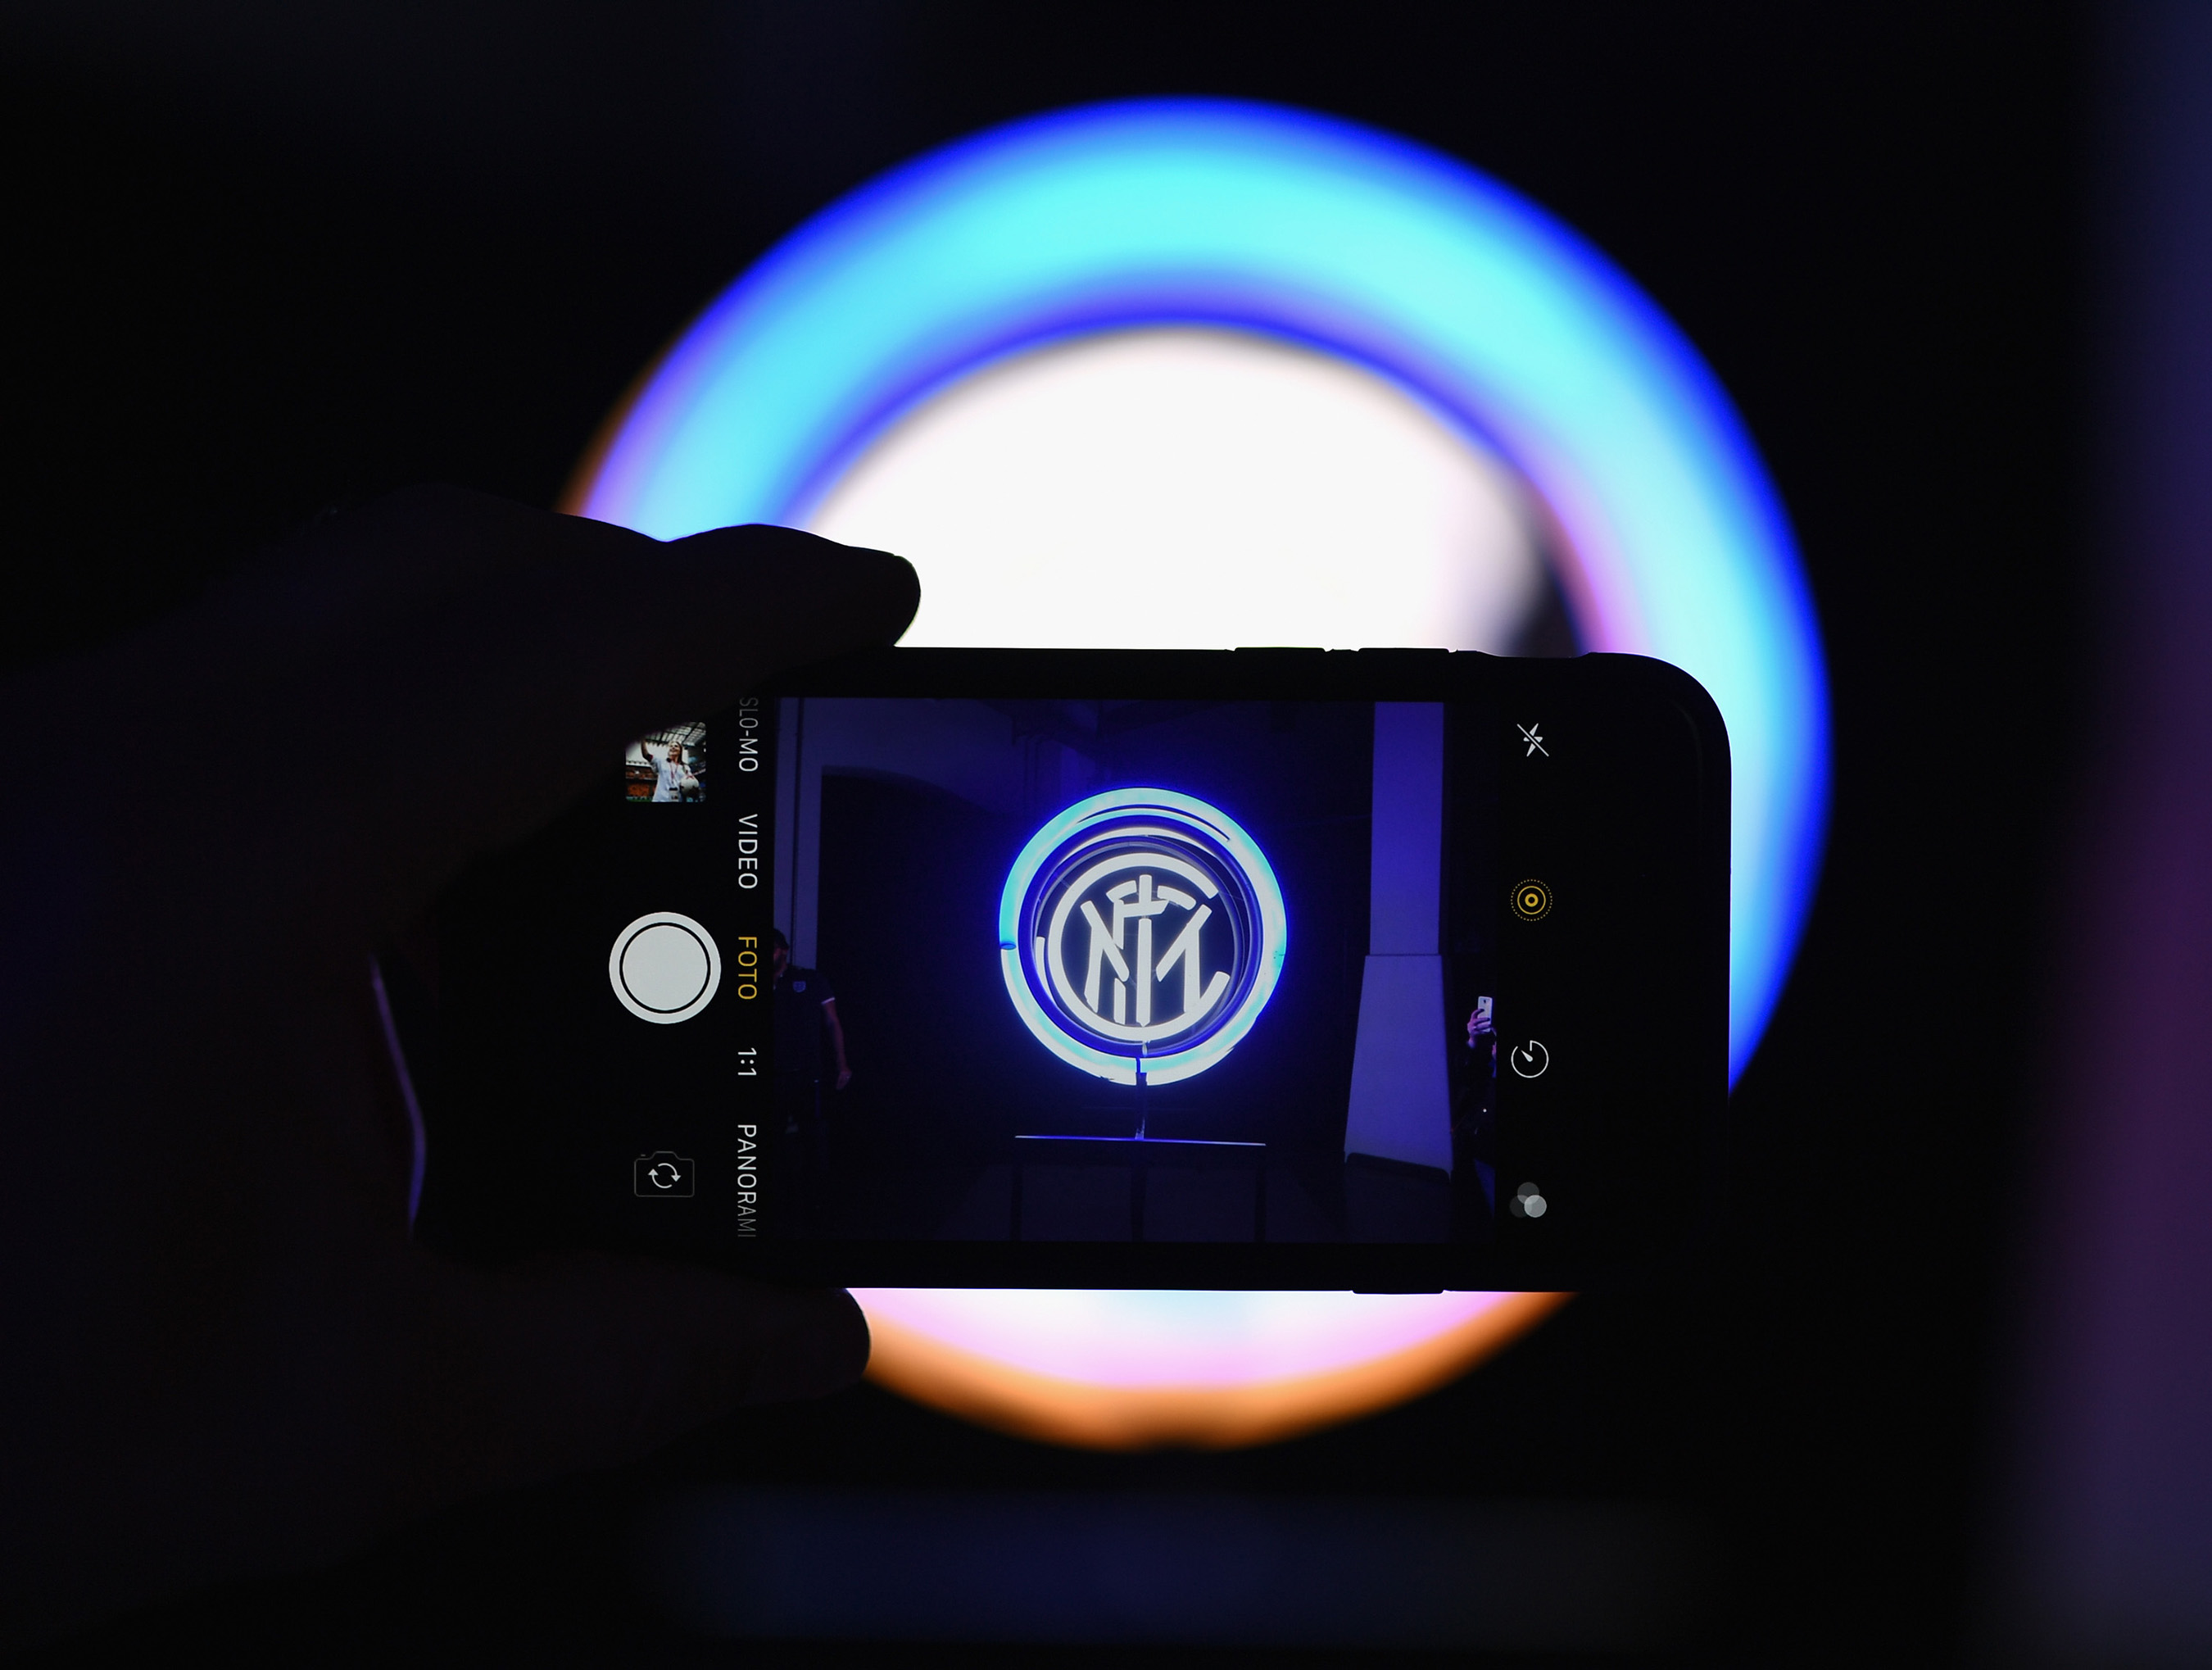 The Colors of Passion installation demonstrates the world of Inter's unique brand identity